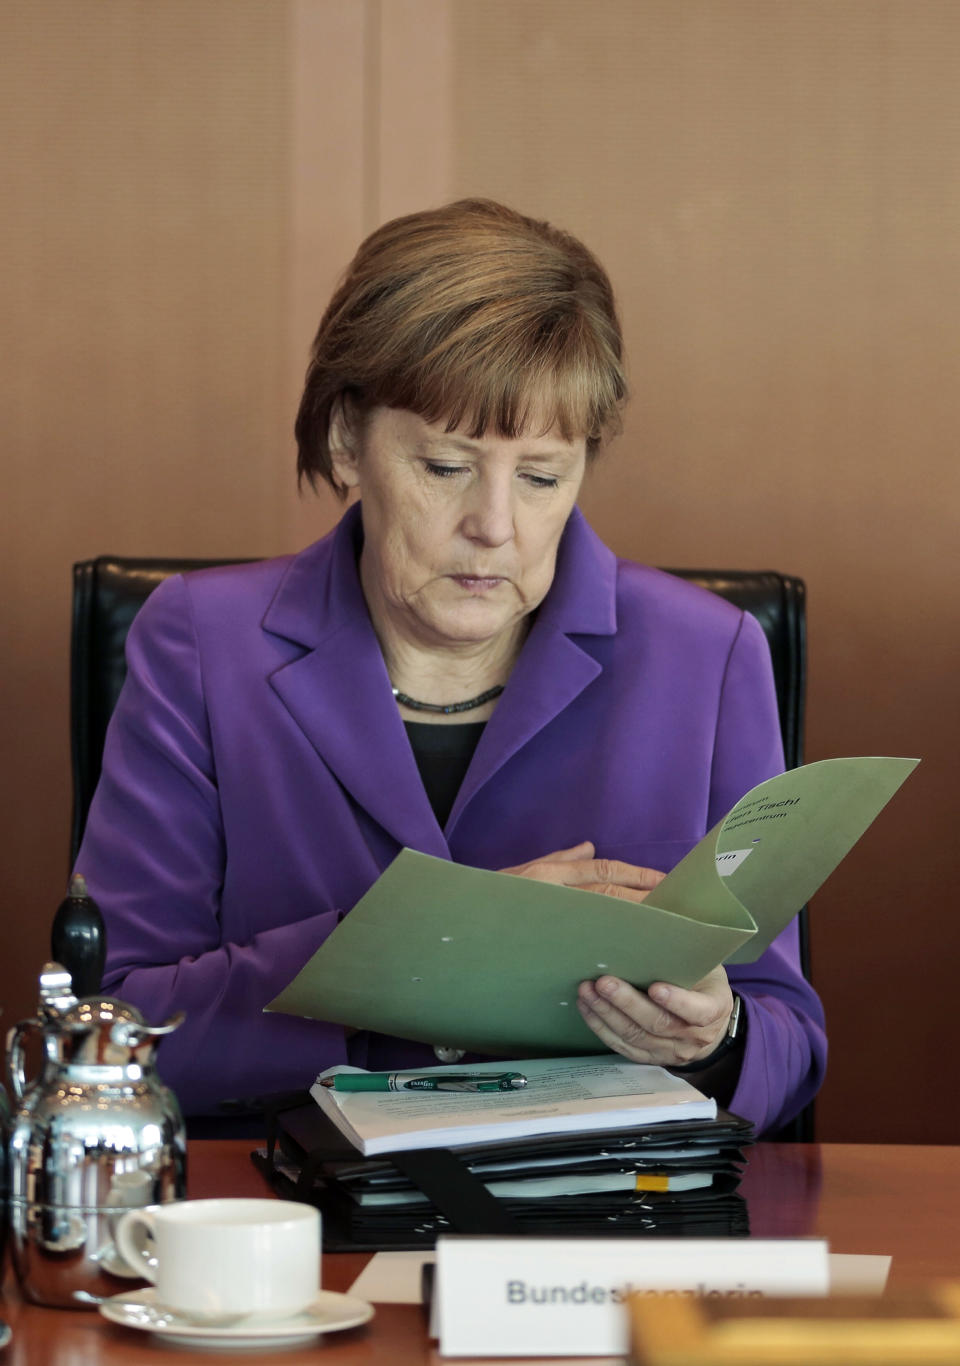 German Chancellor Angela Merkel reads in her documents after arriving for the weekly cabinet meeting at the chancellery in Berlin, Germany, Wednesday, April 2, 2014. (AP Photo/Markus Schreiber)